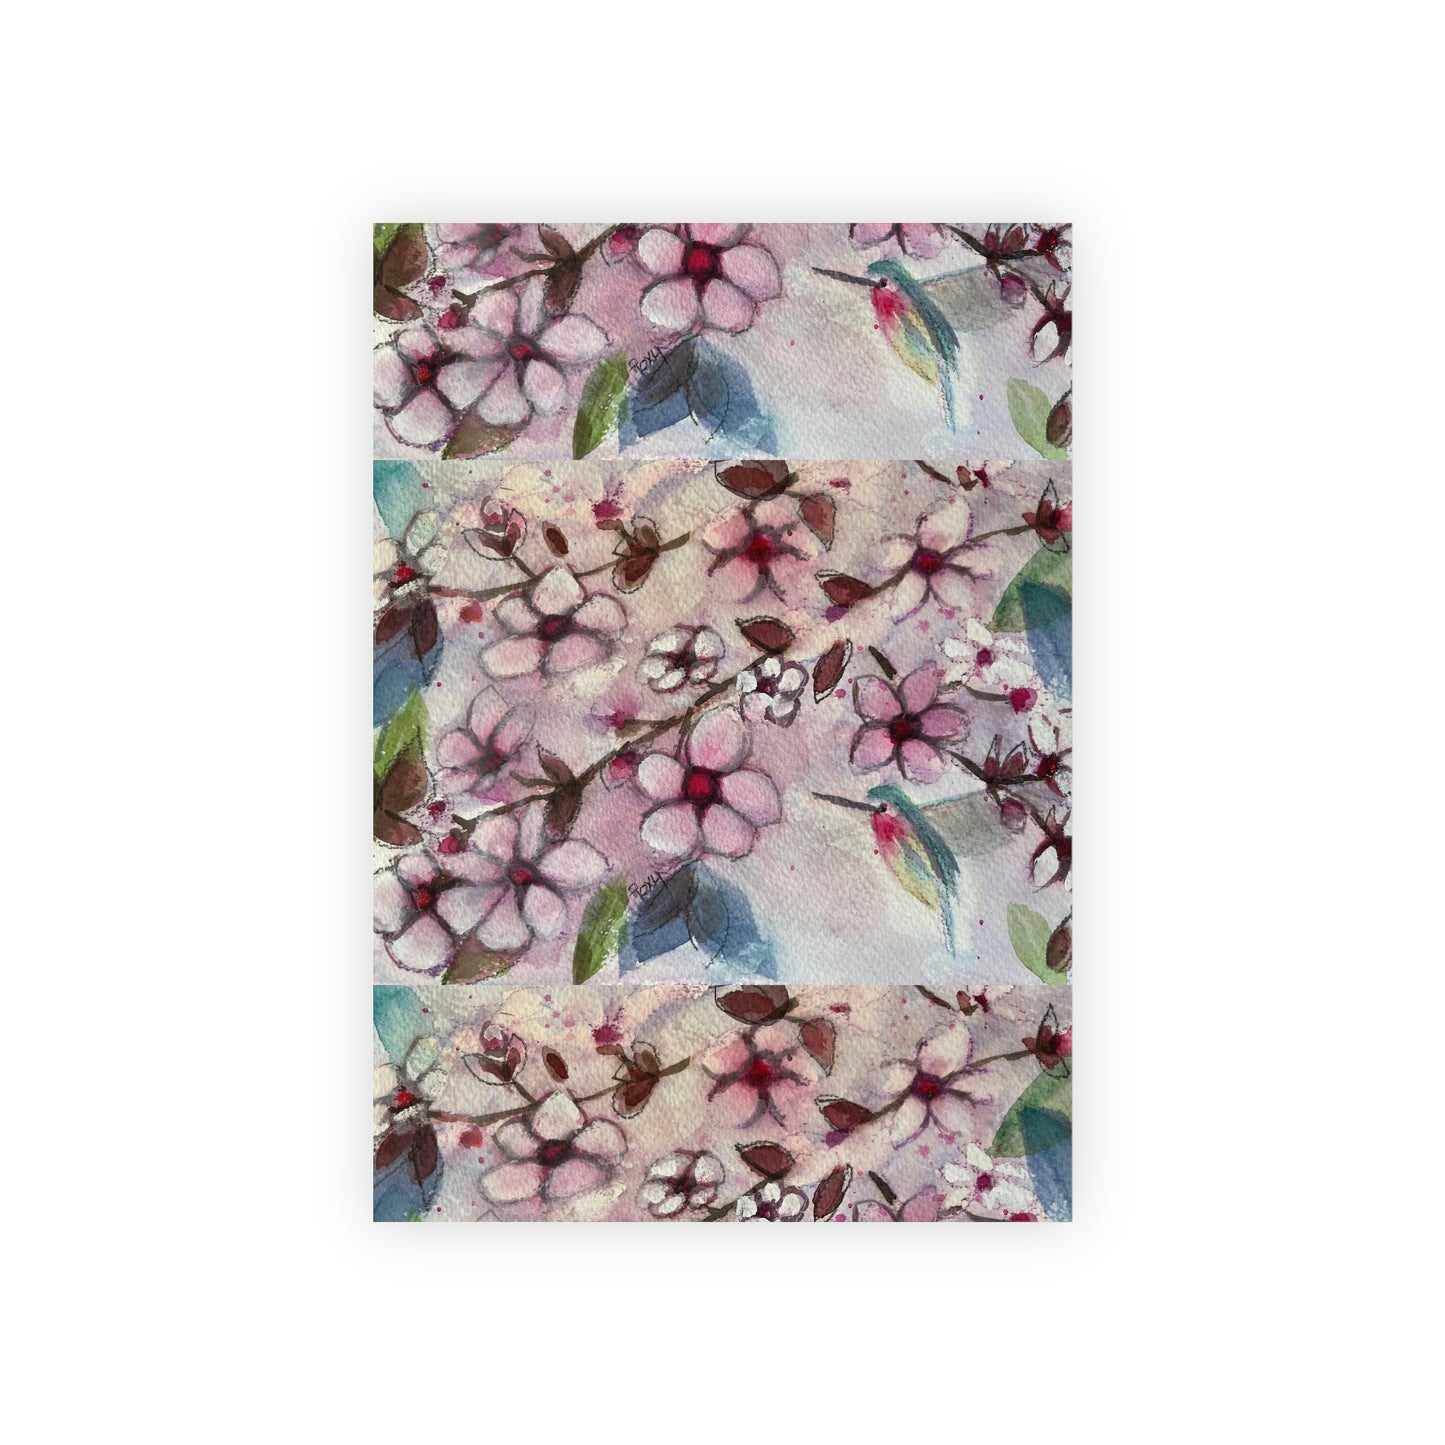 Hummingbird in Cherry Blossoms Gift Wrapping Paper  1pc